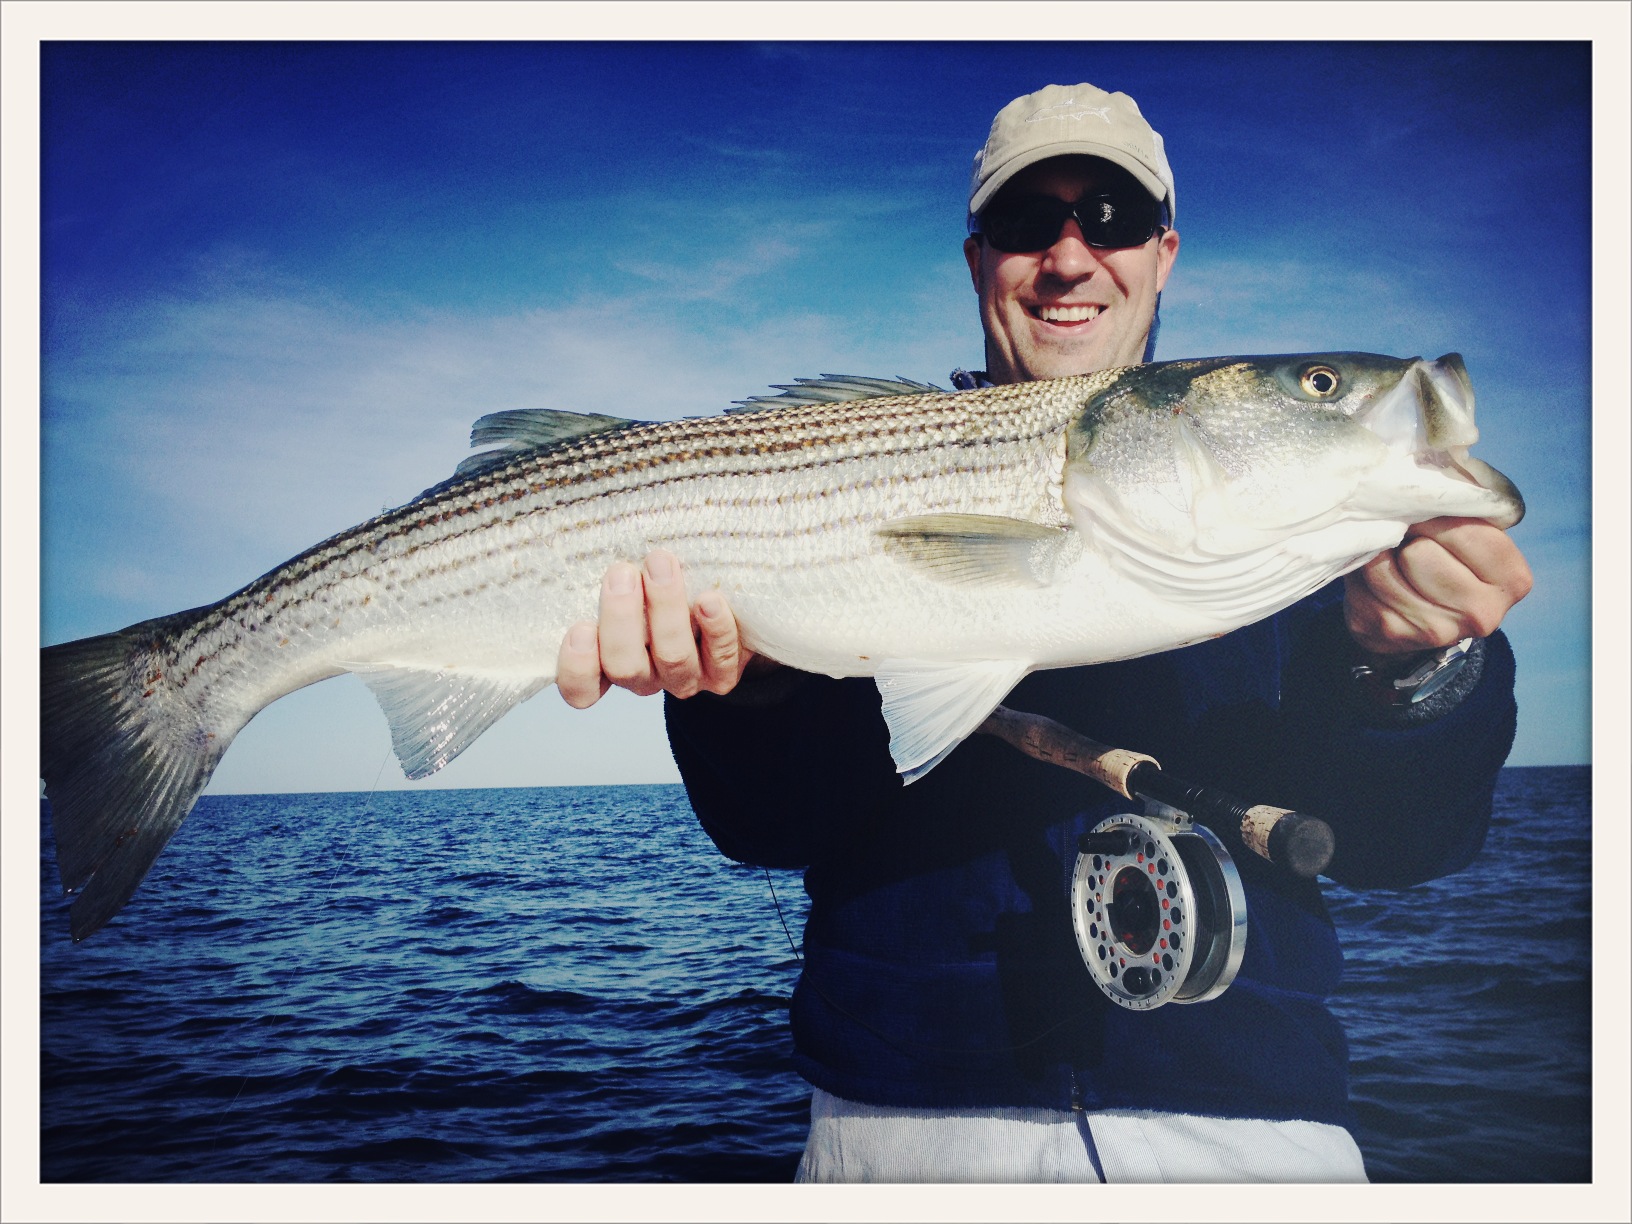 Chasing Birds, Striped Bass on Cape Cod | New England On The Fly